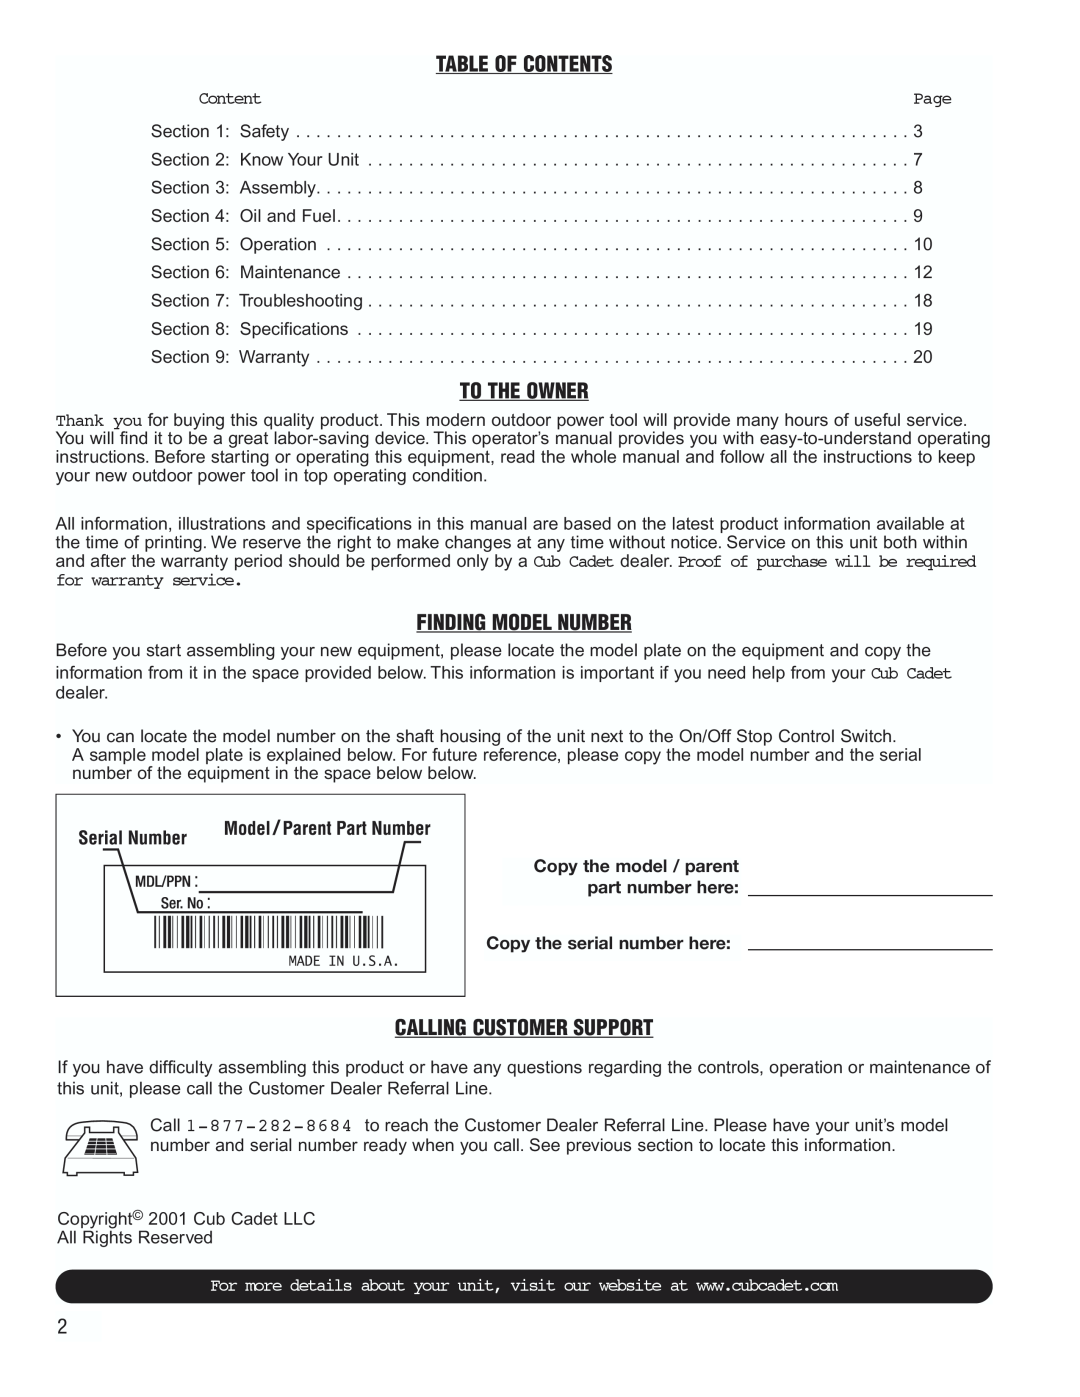 Cub Cadet CC3000 manual Table Of Contents, To The Owner, Finding Model Number, Calling Customer Support 